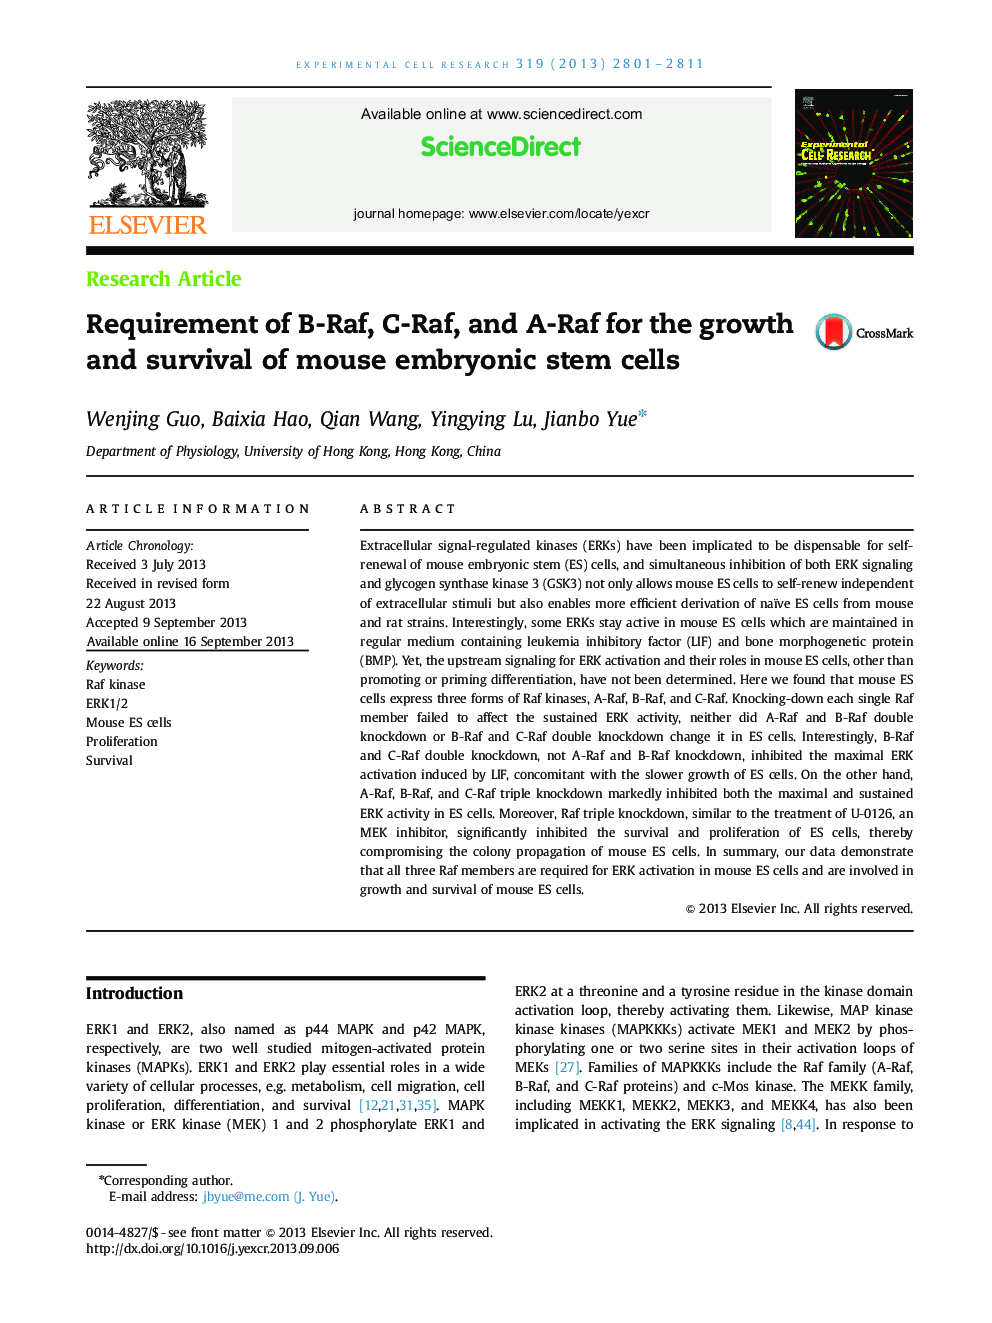 Requirement of B-Raf, C-Raf, and A-Raf for the growth and survival of mouse embryonic stem cells